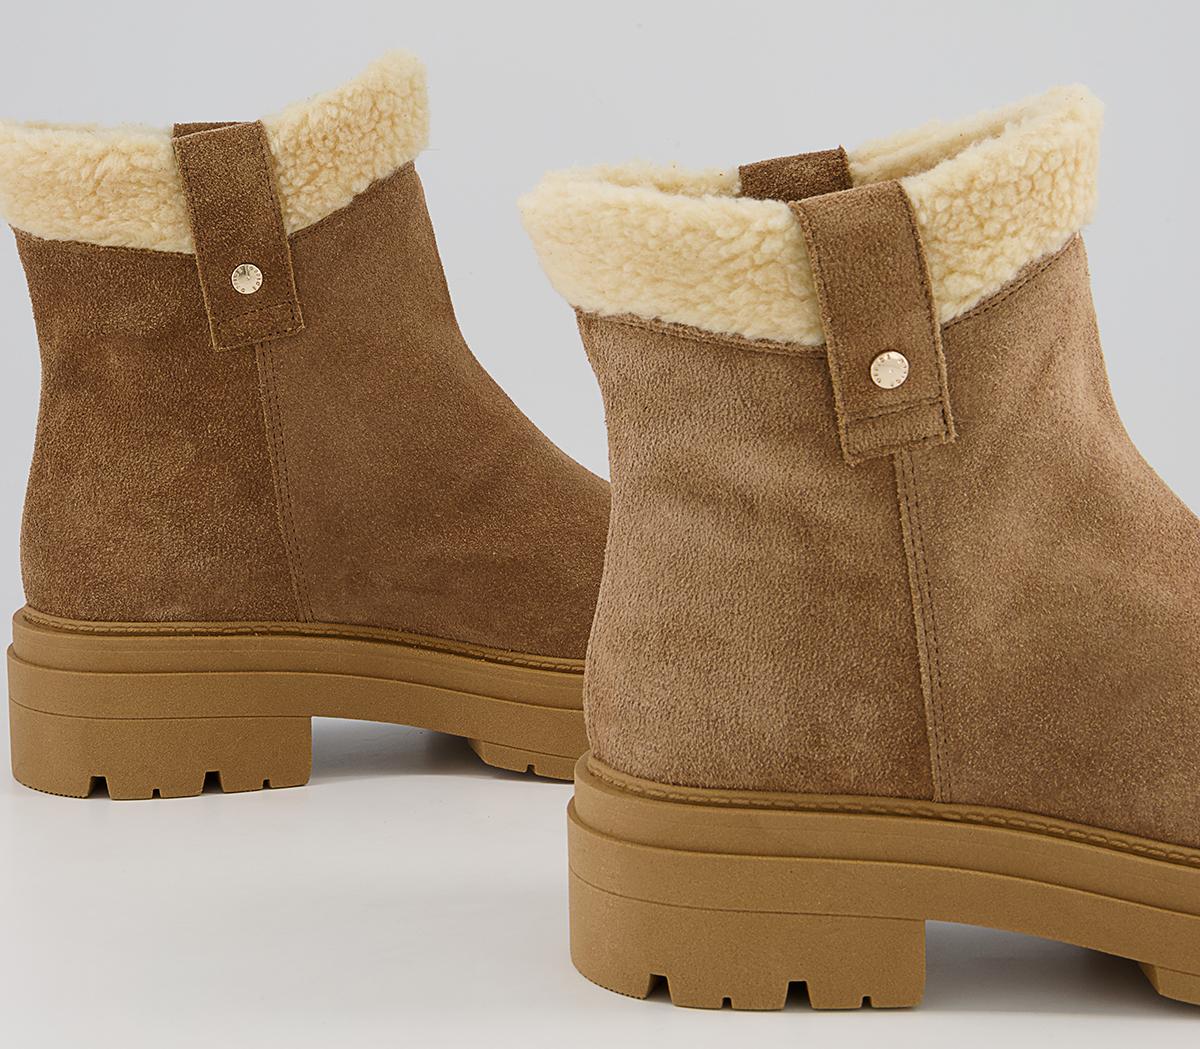 OFFICE Assort Shearling Pull On Chunky Ankle Boots Camel Suede - Women ...